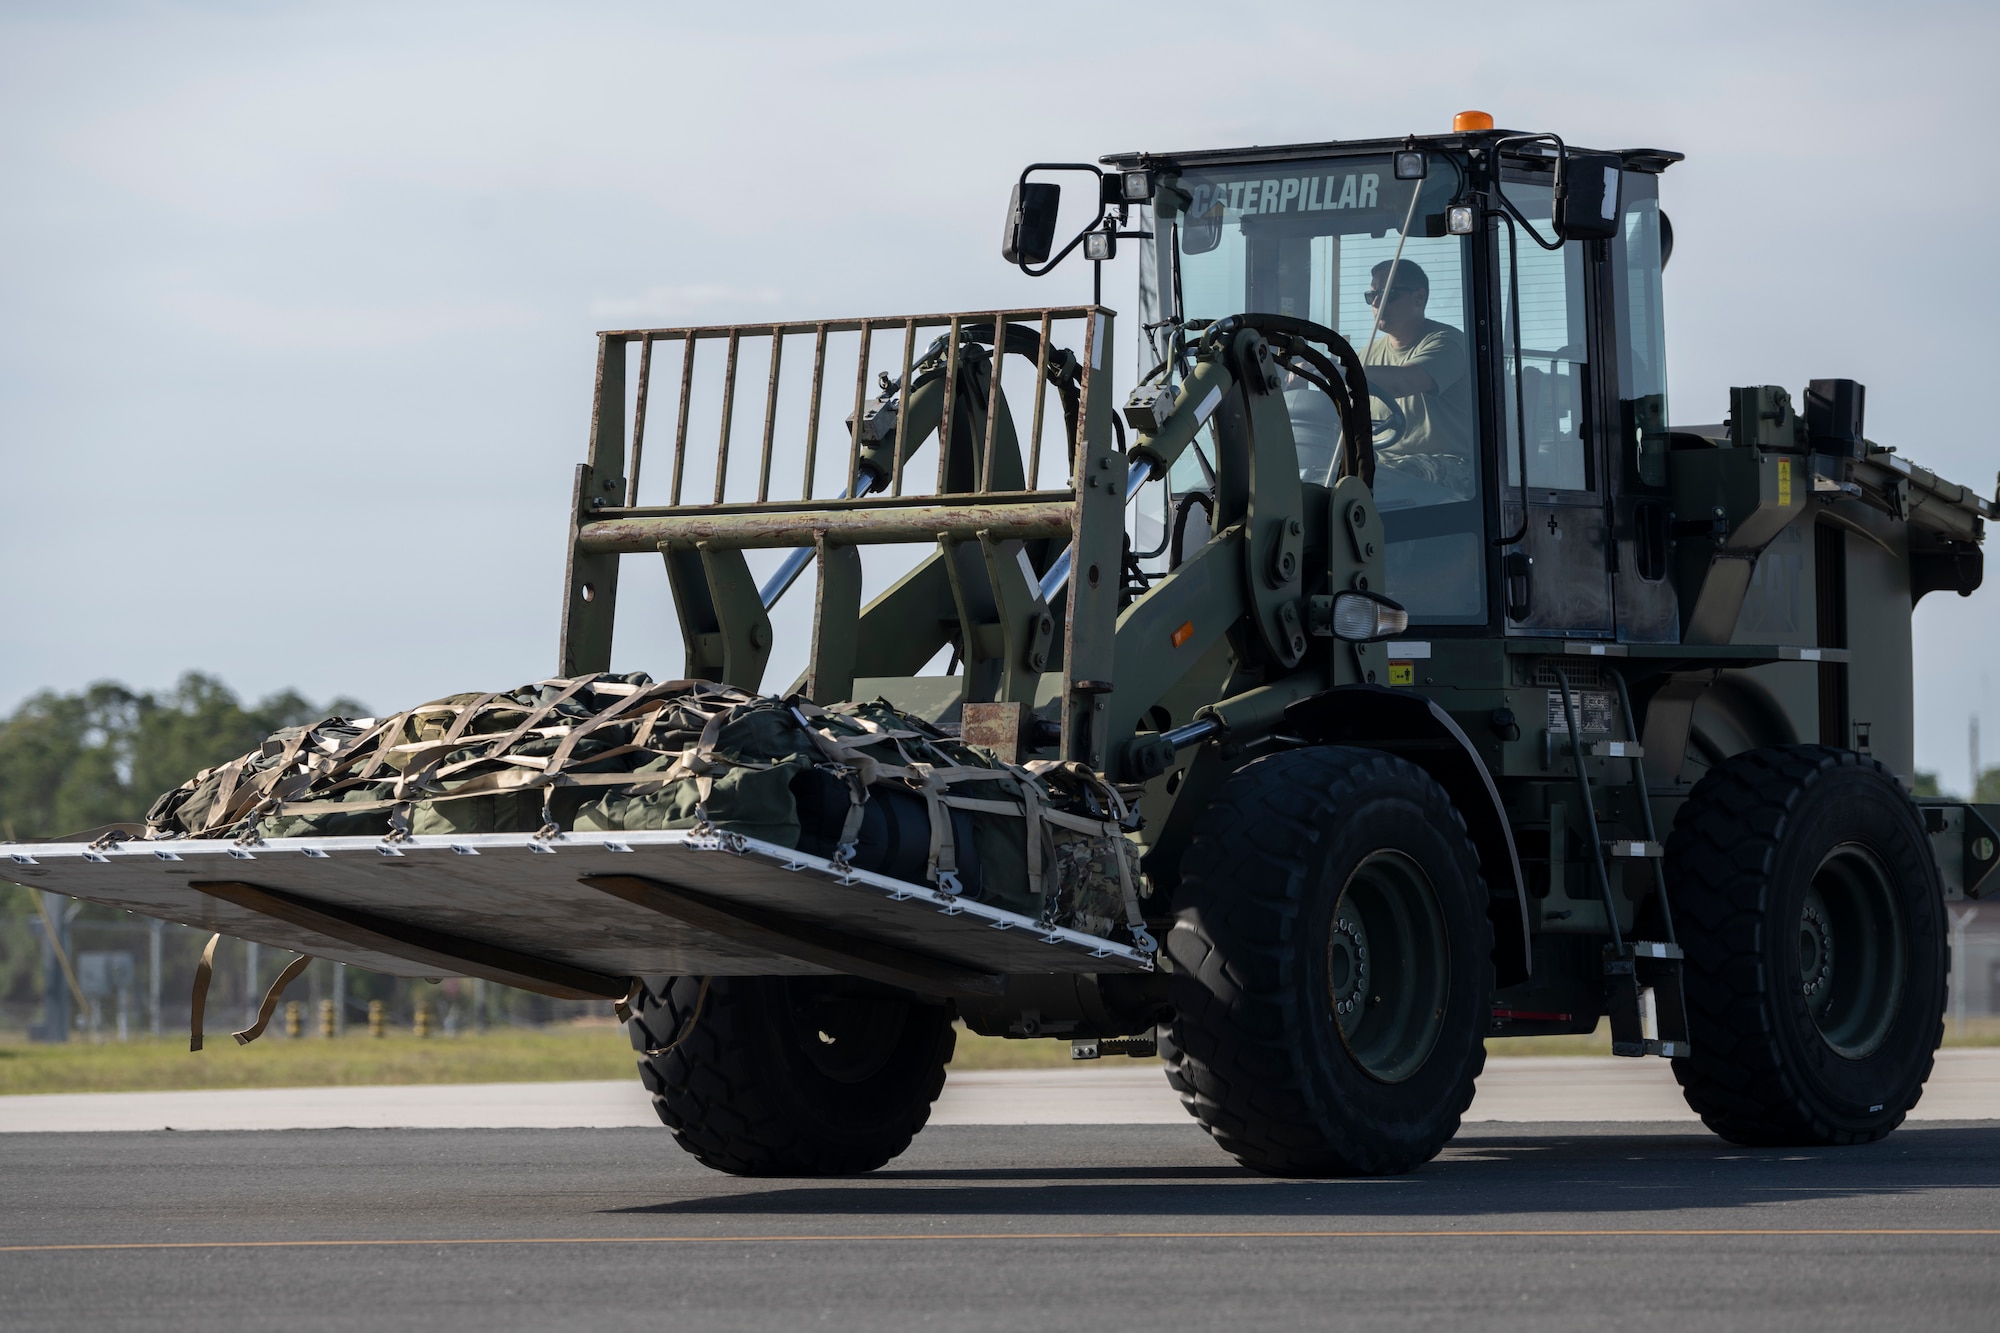 8U.S. Air Force Senior Airman Calvin Newvine, 23rd Logistics Readiness Squadron air transportation technician, transports palletized luggage at Avon Park Air Force Range, Florida, April 8, 2024. Air transportation Airmen are responsible for securing, managing and transporting personnel and cargo. Ready Tiger 24-1 is a readiness exercise demonstrating the 23rd Wing’s ability to plan, prepare and execute operations and maintenance to project air power in contested and dispersed locations, defending the United States’ interests and allies. (U.S. Air Force photo by Senior Airman Rachel Coates)